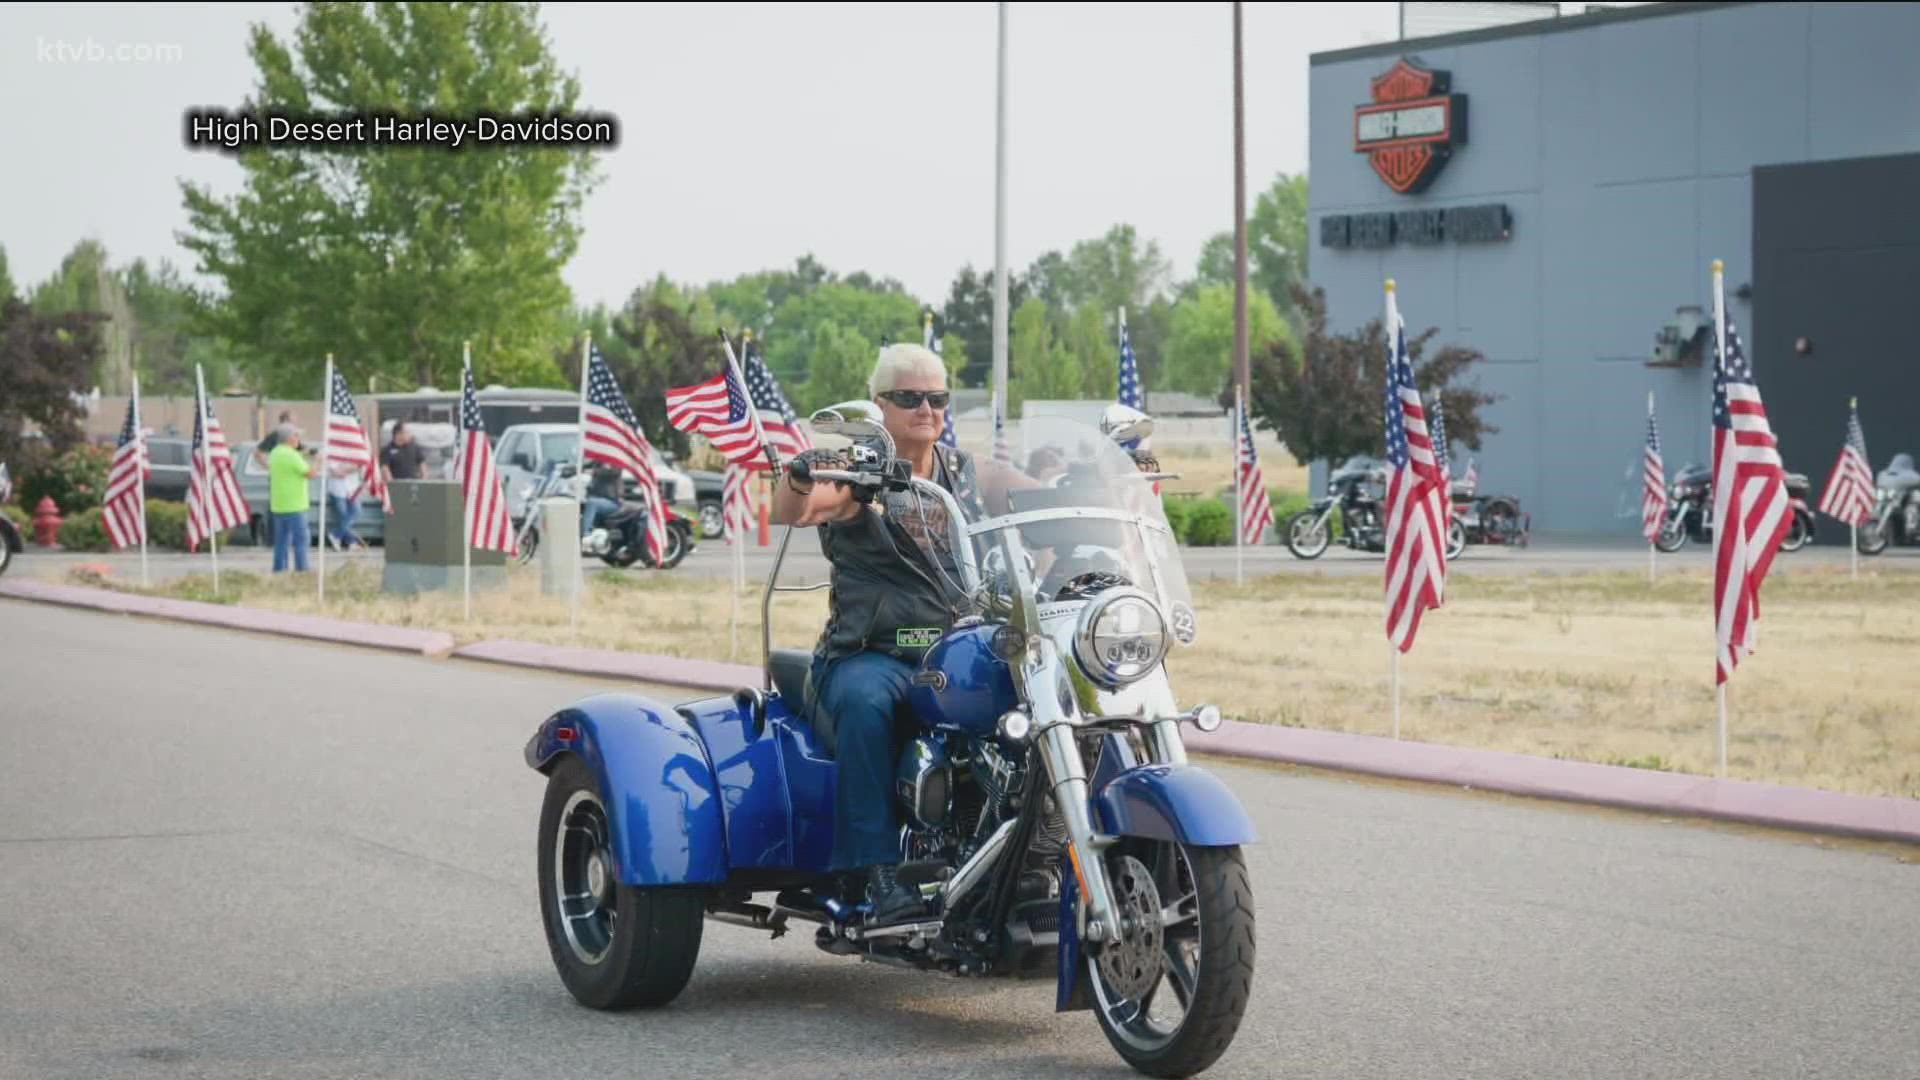 The Idaho Patriot Thunder Ride benefits the Idaho Guard & Reserve Family Support Fund and Operation Warmheart. The ride will now take place Sunday, June 12.